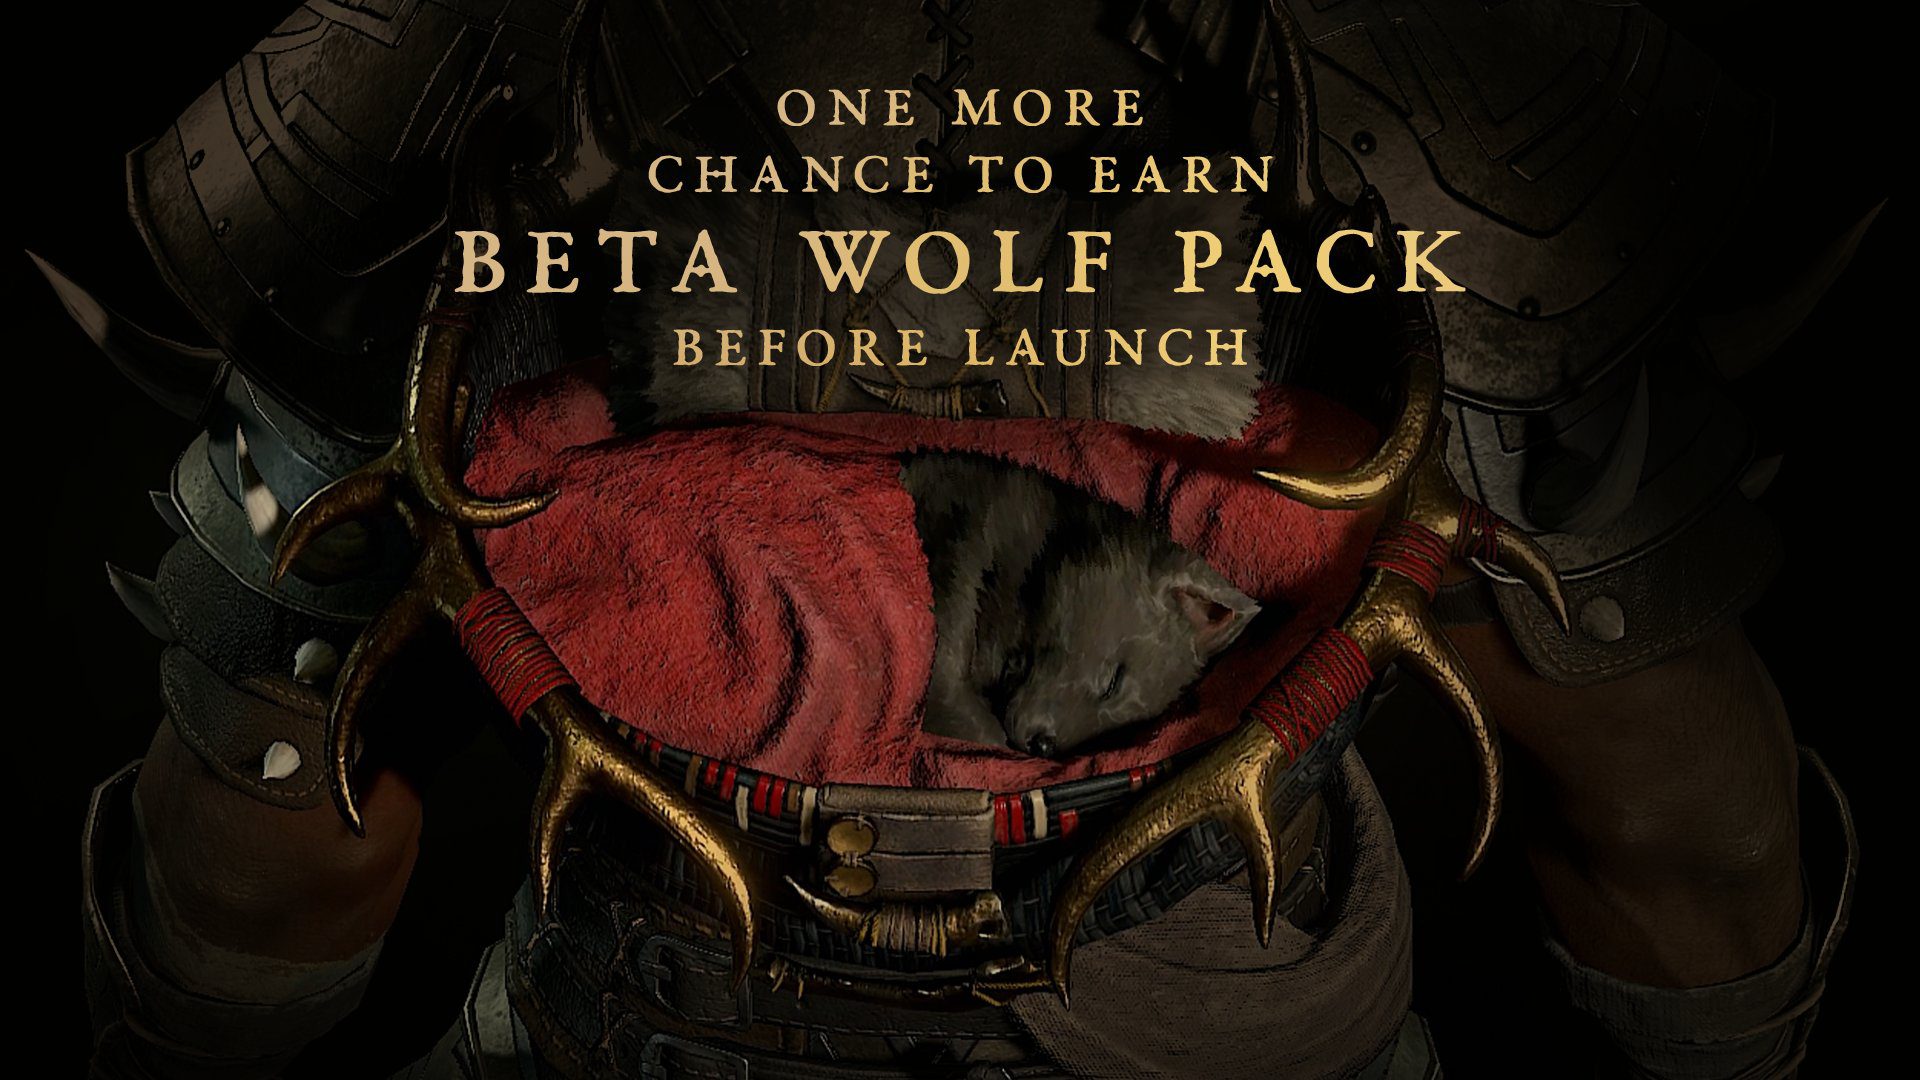 The Diablo 4 Beta Wolf Pack will be available for one more time during the upcoming open beta